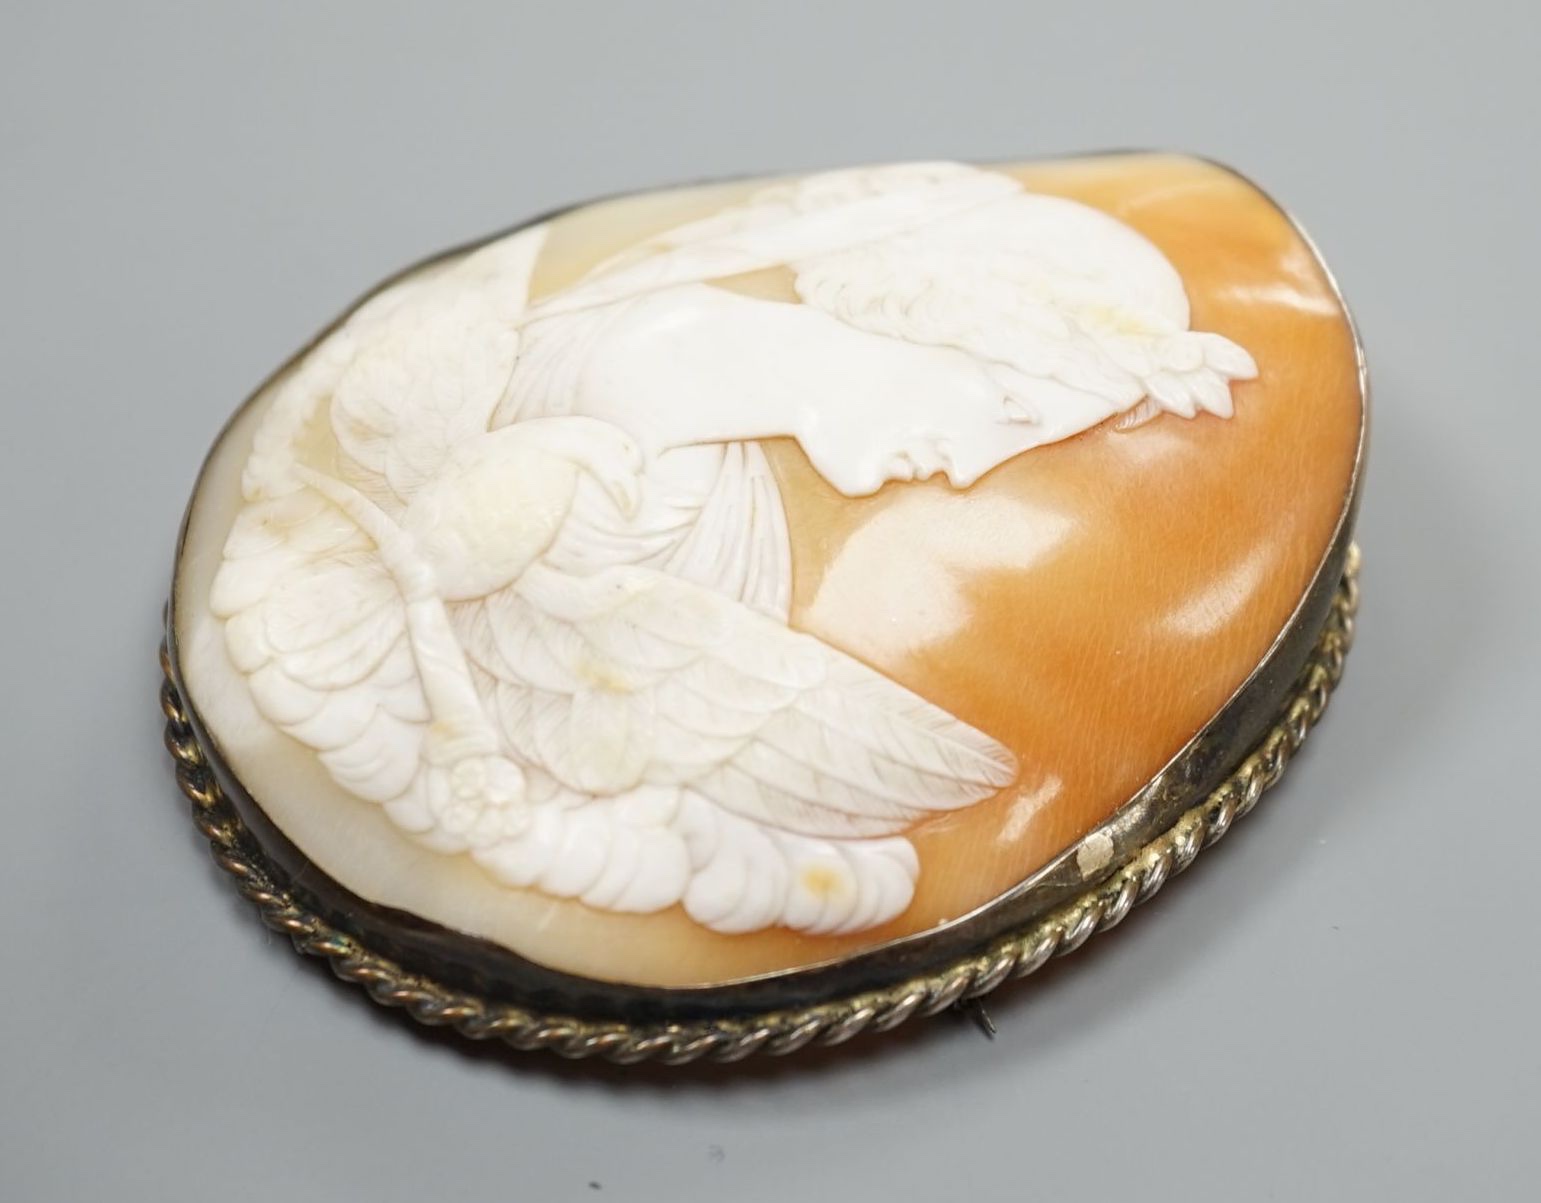 A large white metal mounted oval cameo shell brooch, carved with the Goddess Diana and eagle, 75mm.